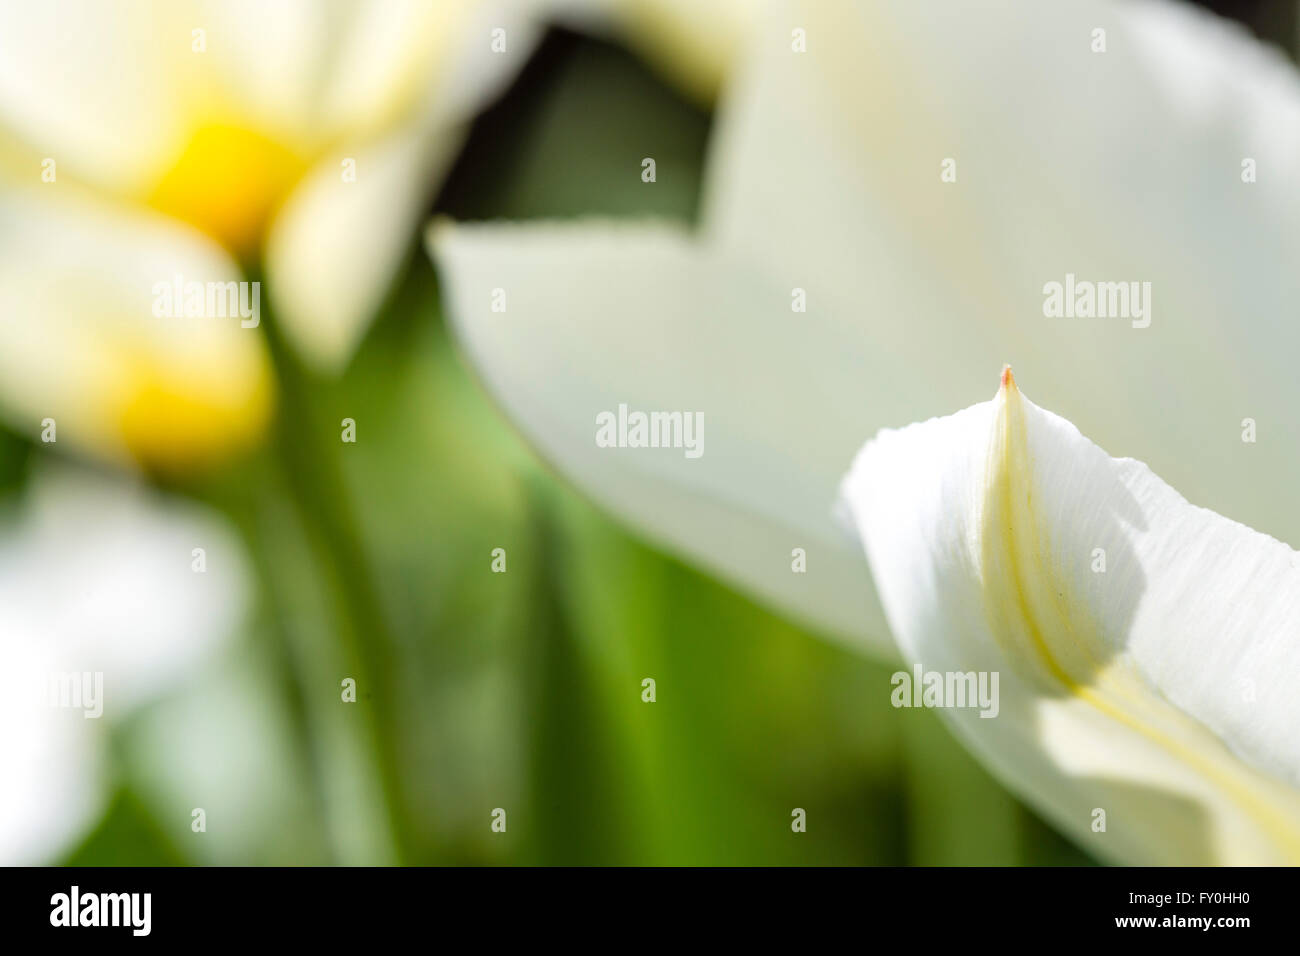 White tulips in the spring sunshine. Stock Photo